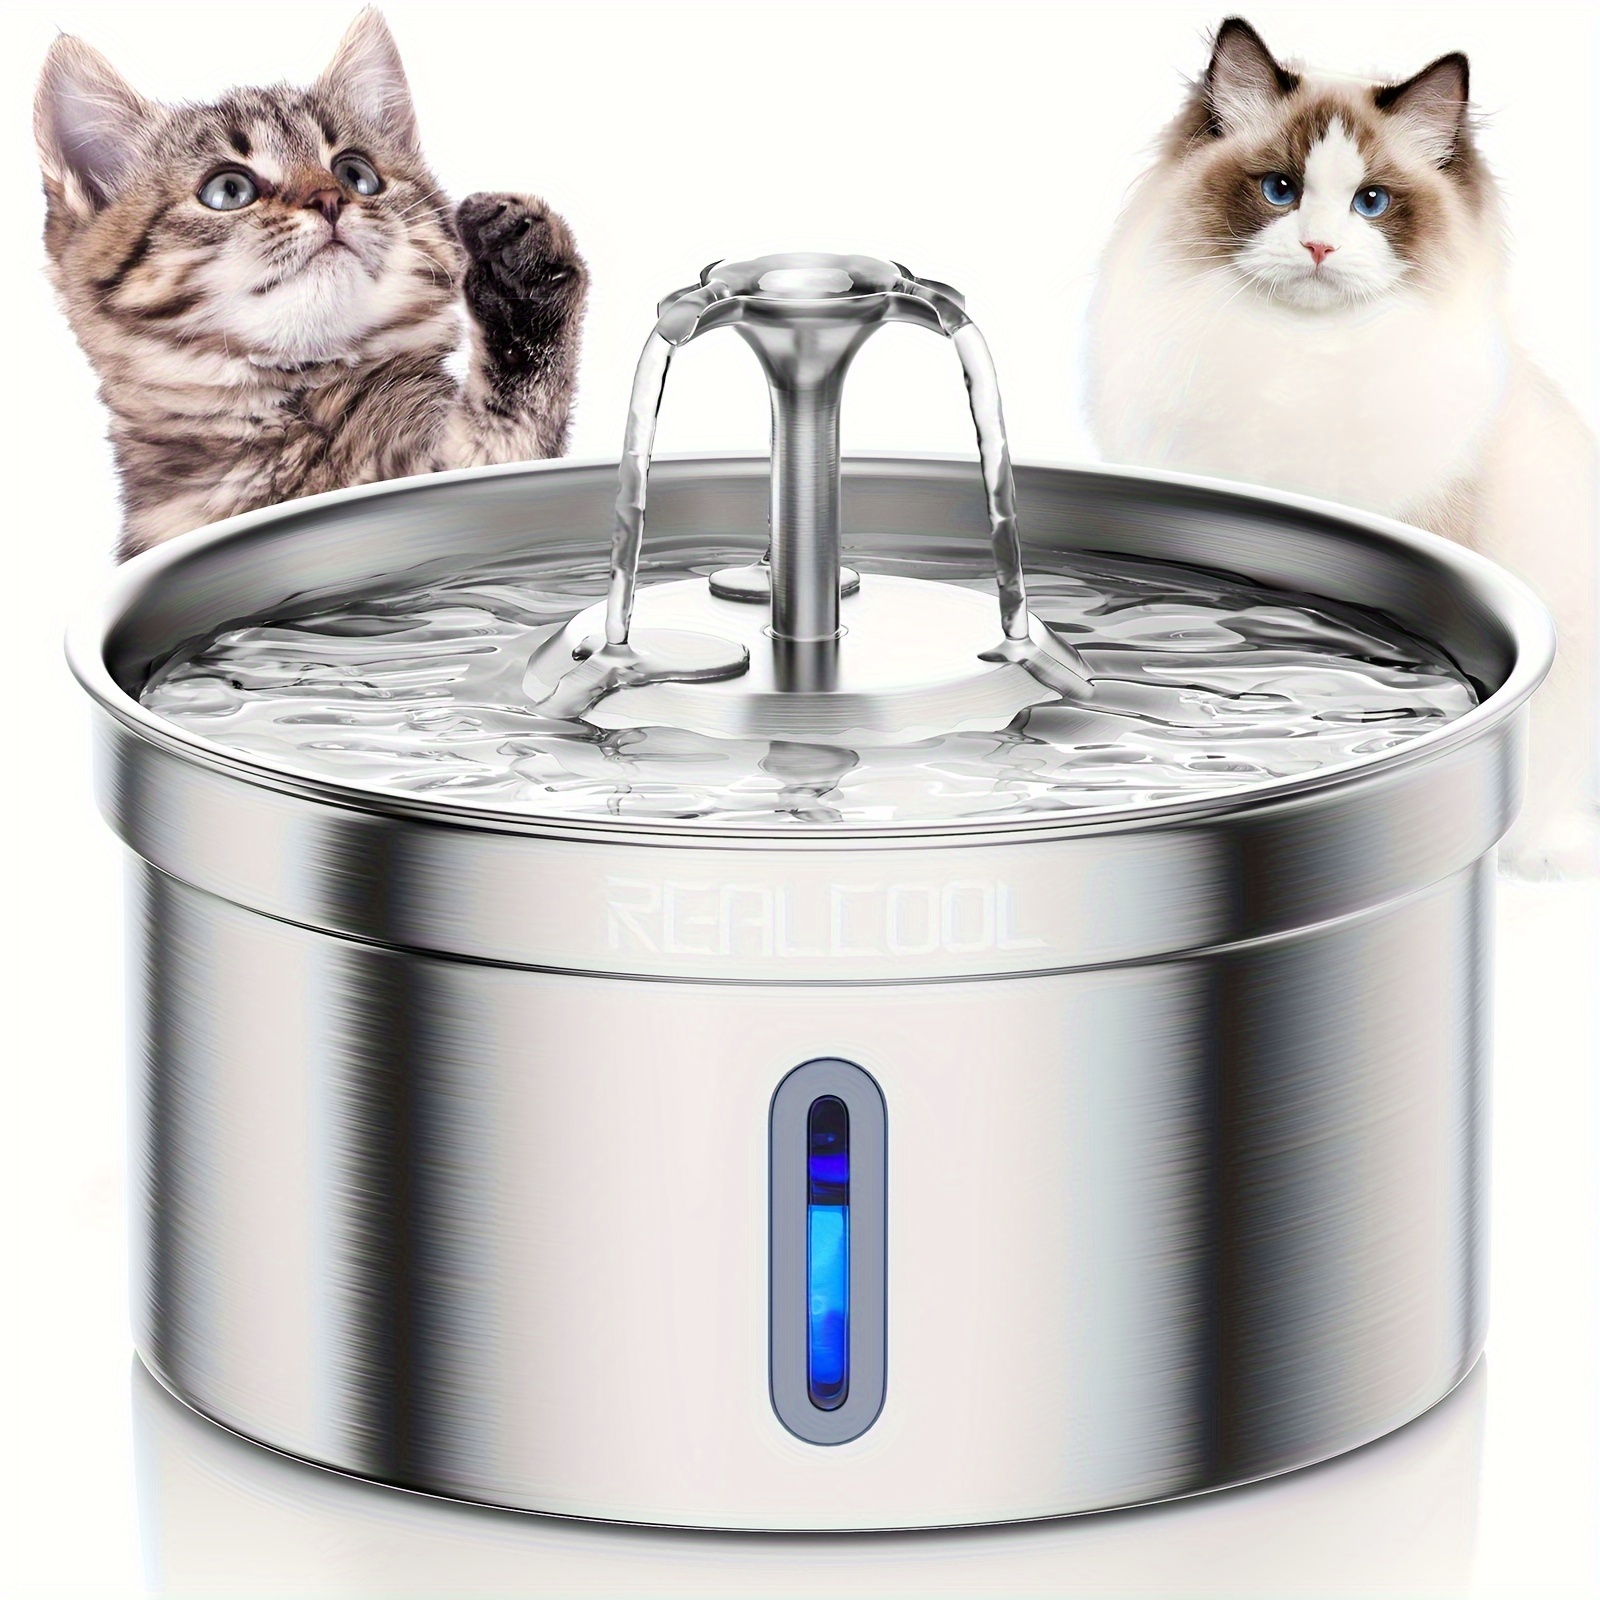 

Cat Water Fountain Stainless Steel 4l/132oz, Large Capacity Pet Water Fountain For Cats Inside, Automatic Dog Water Dispenser With Quiet Pump, Suitable For Multi-pet Households